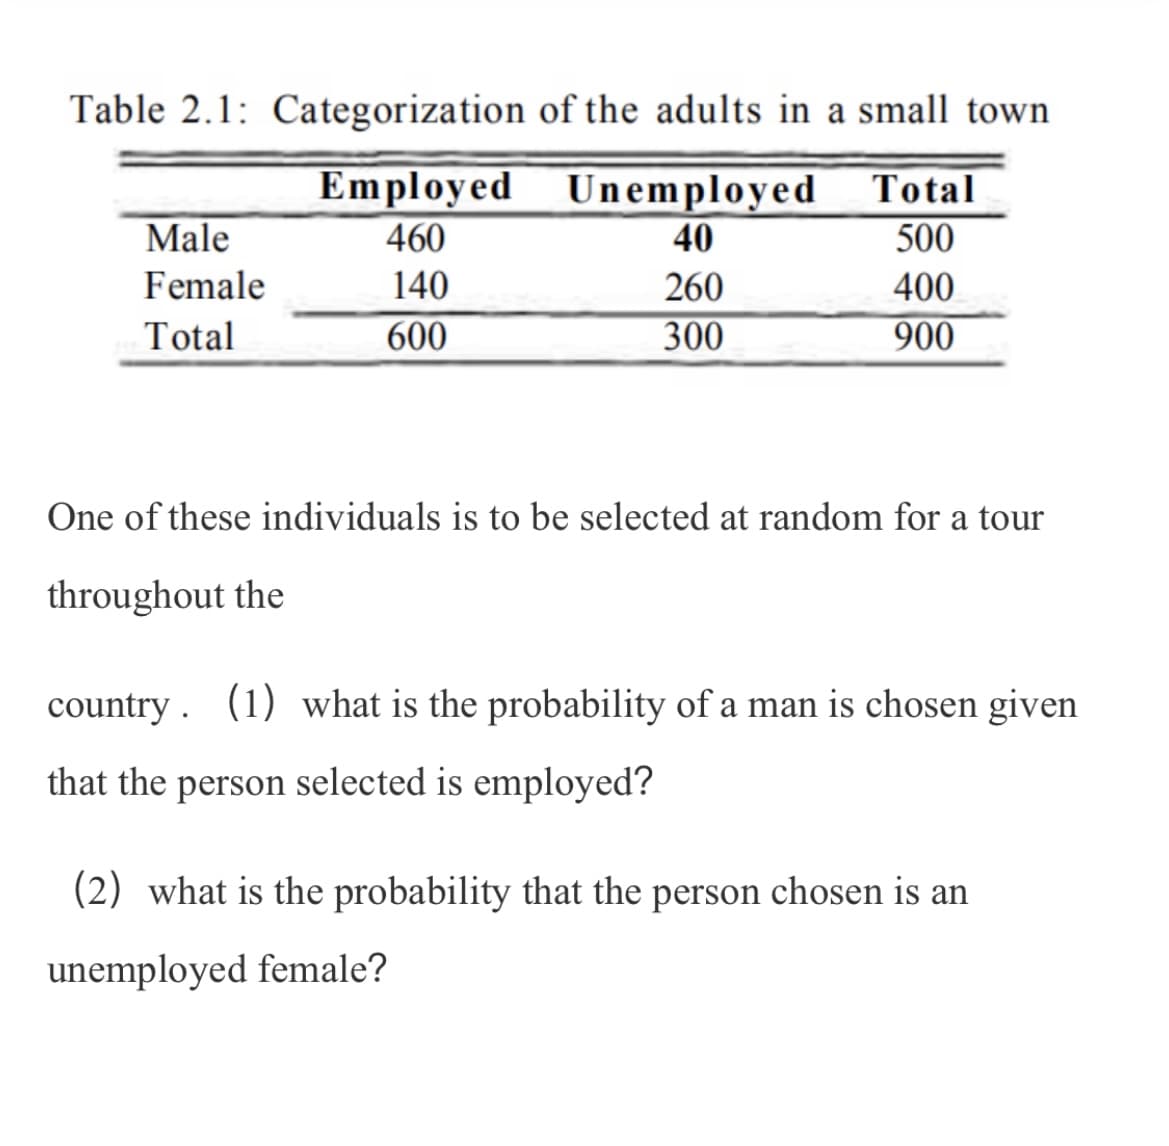 Table 2.1: Categorization of the adults in a small town
Employed Unemployed Total
460
Male
40
500
Female
140
260
400
Total
600
300
900
One of these individuals is to be selected at random for a tour
throughout the
country . (1) what is the probability of a man is chosen given
that the person selected is employed?
(2) what is the probability that the person chosen is an
unemployed female?
